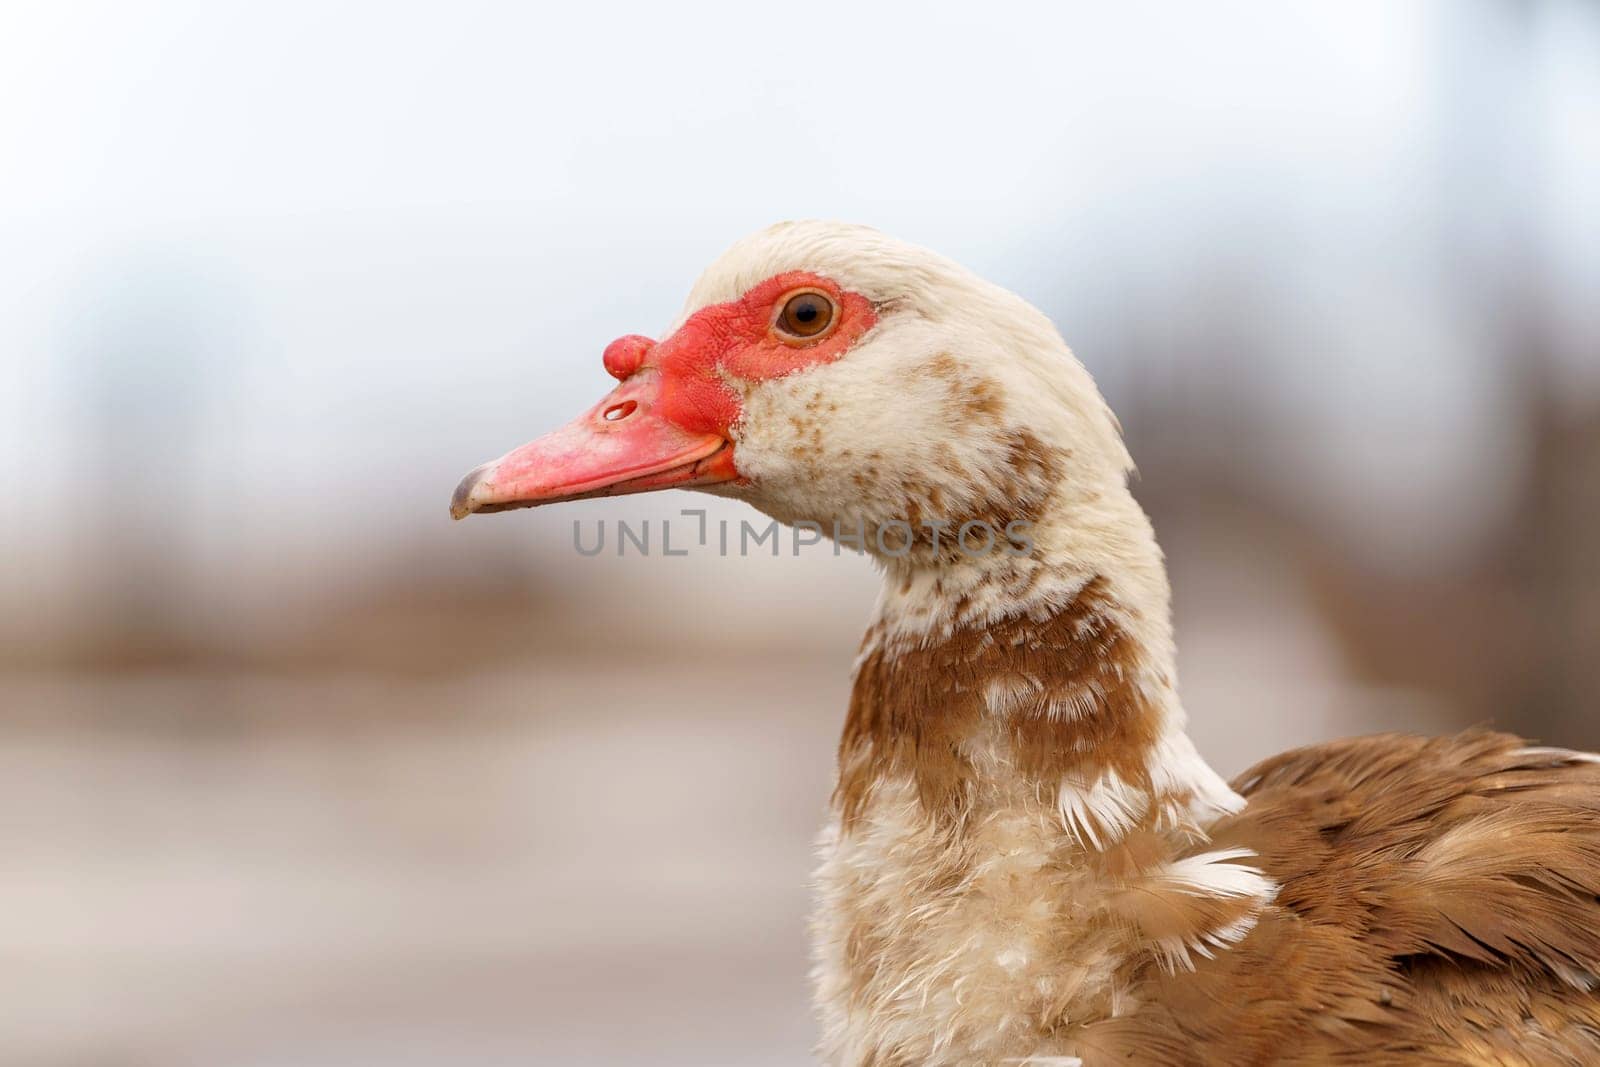 Muscovy ducks standing next to each other on a farm, selective focus by darksoul72